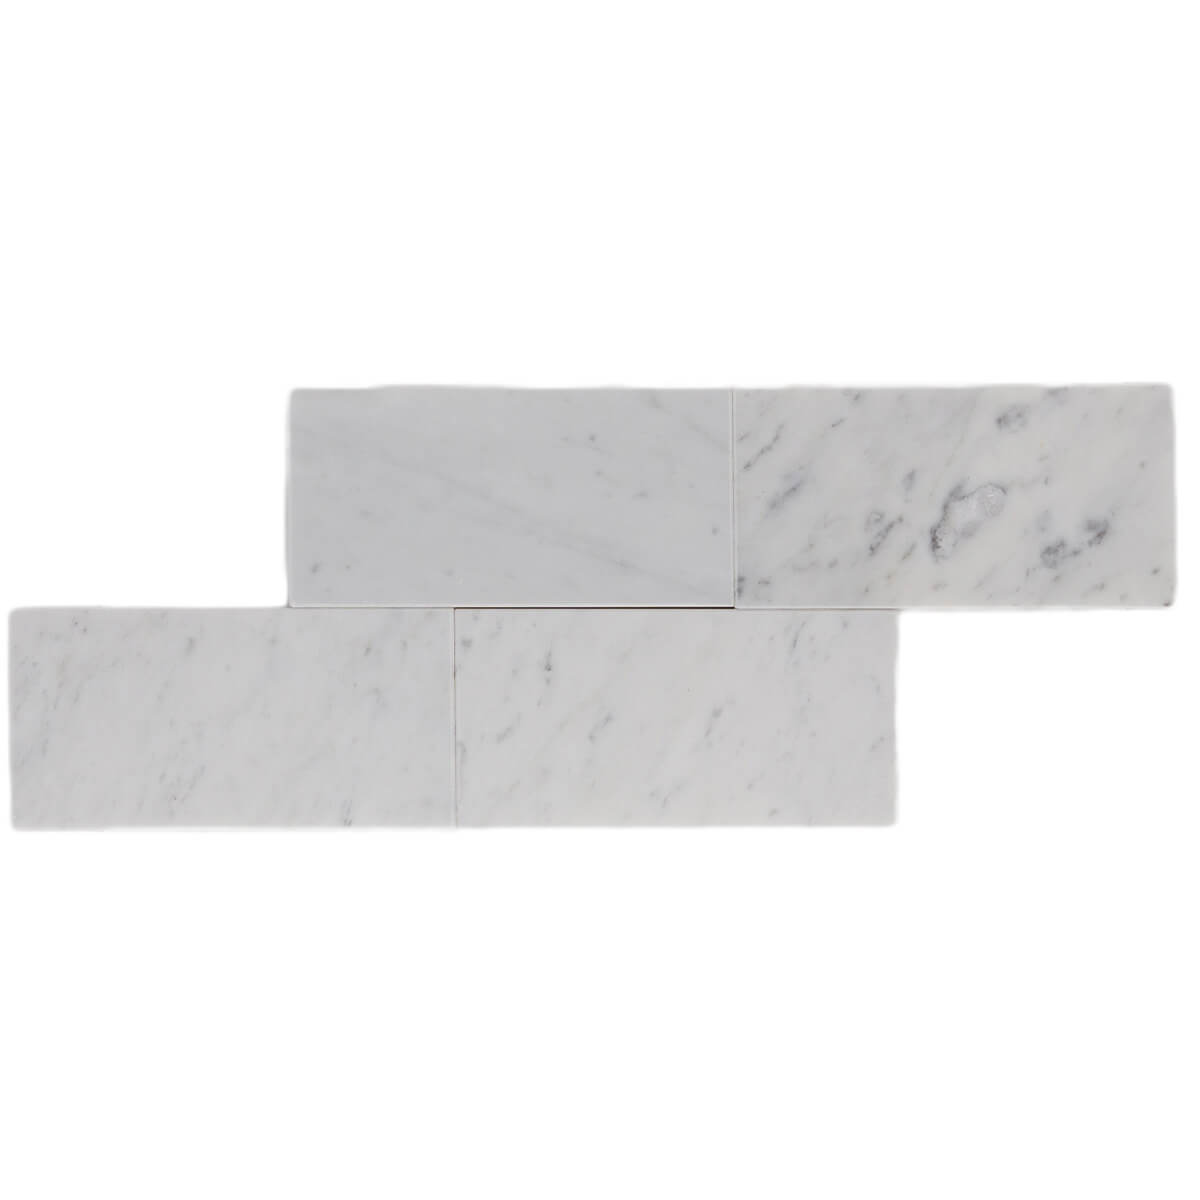 Carrara Bianco marble field tiles, 3x6 inches, 0.375 inches thick, straight edge.